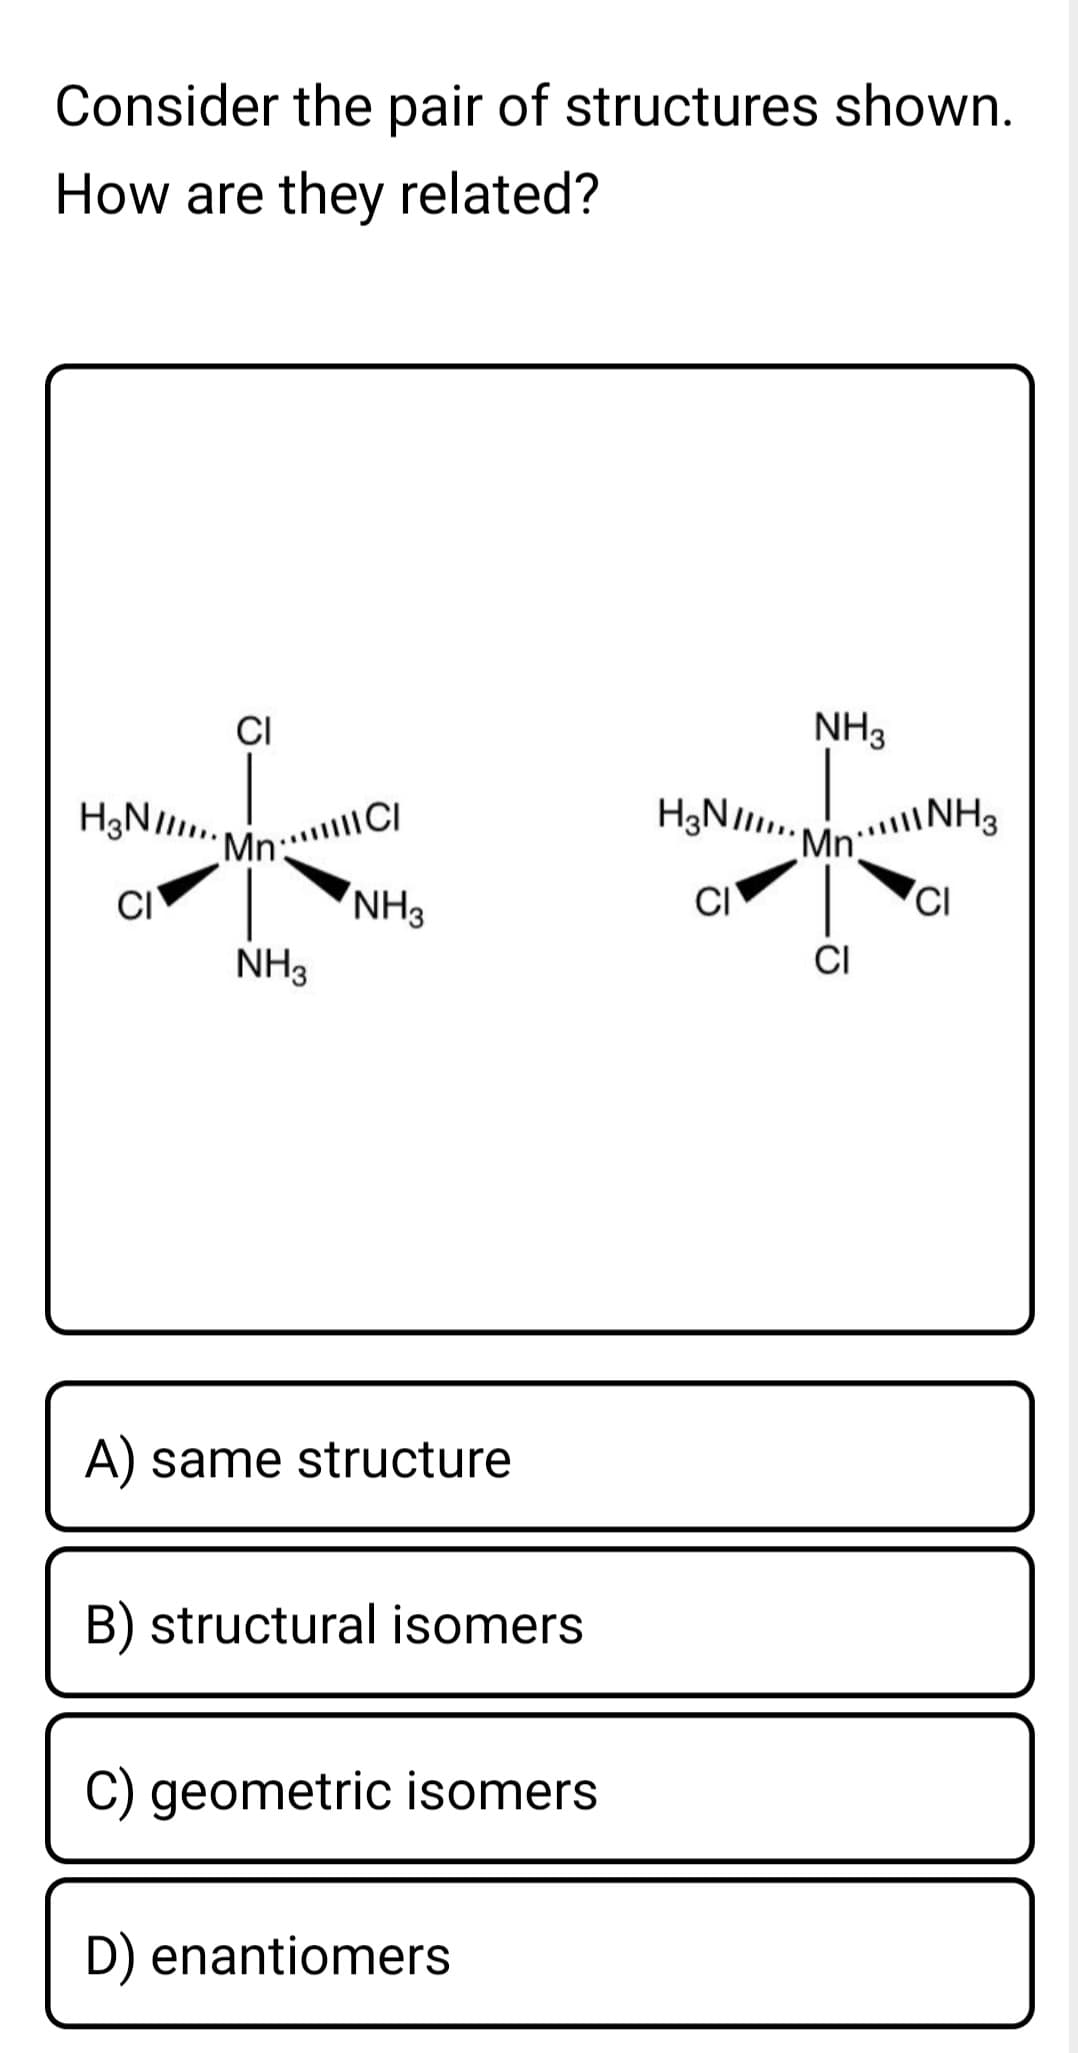 H3NI Mn: CI
Consider the pair of structures shown.
How are they related?
CI
NH3
H3NI INH3
Mn CI
NH3
Mn
CI
CI
CI
NH3
CI
A) same structure
B) structural isomers
C) geometric isomers
D) enantiomers
